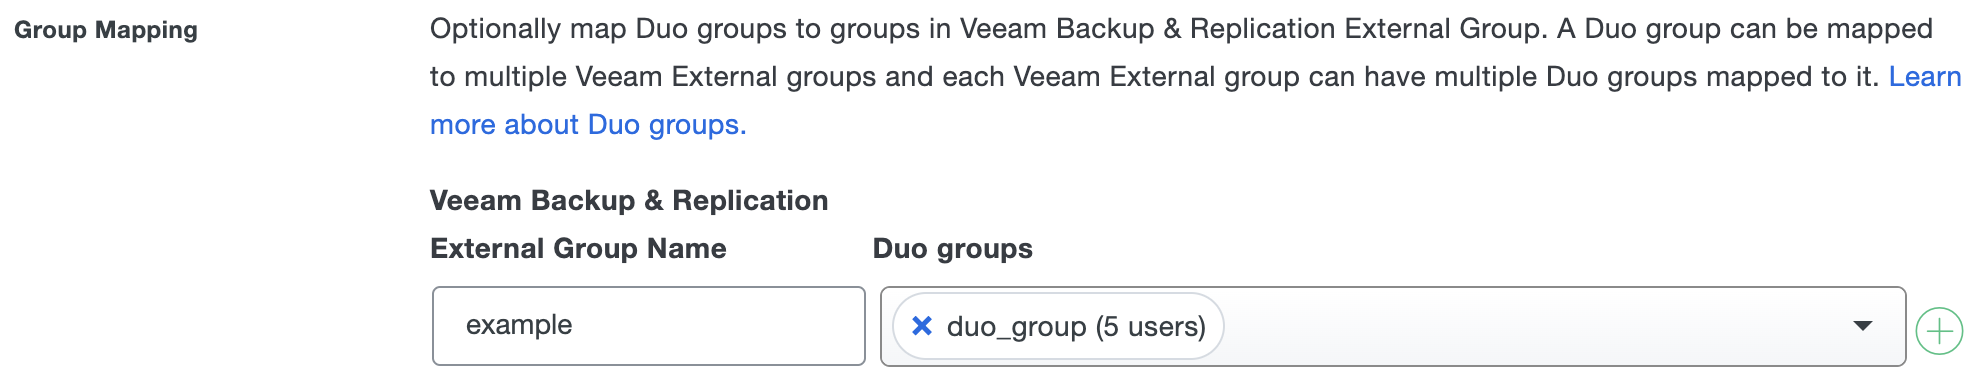 Duo Veeam Backup & Replication Group Mapping Fields